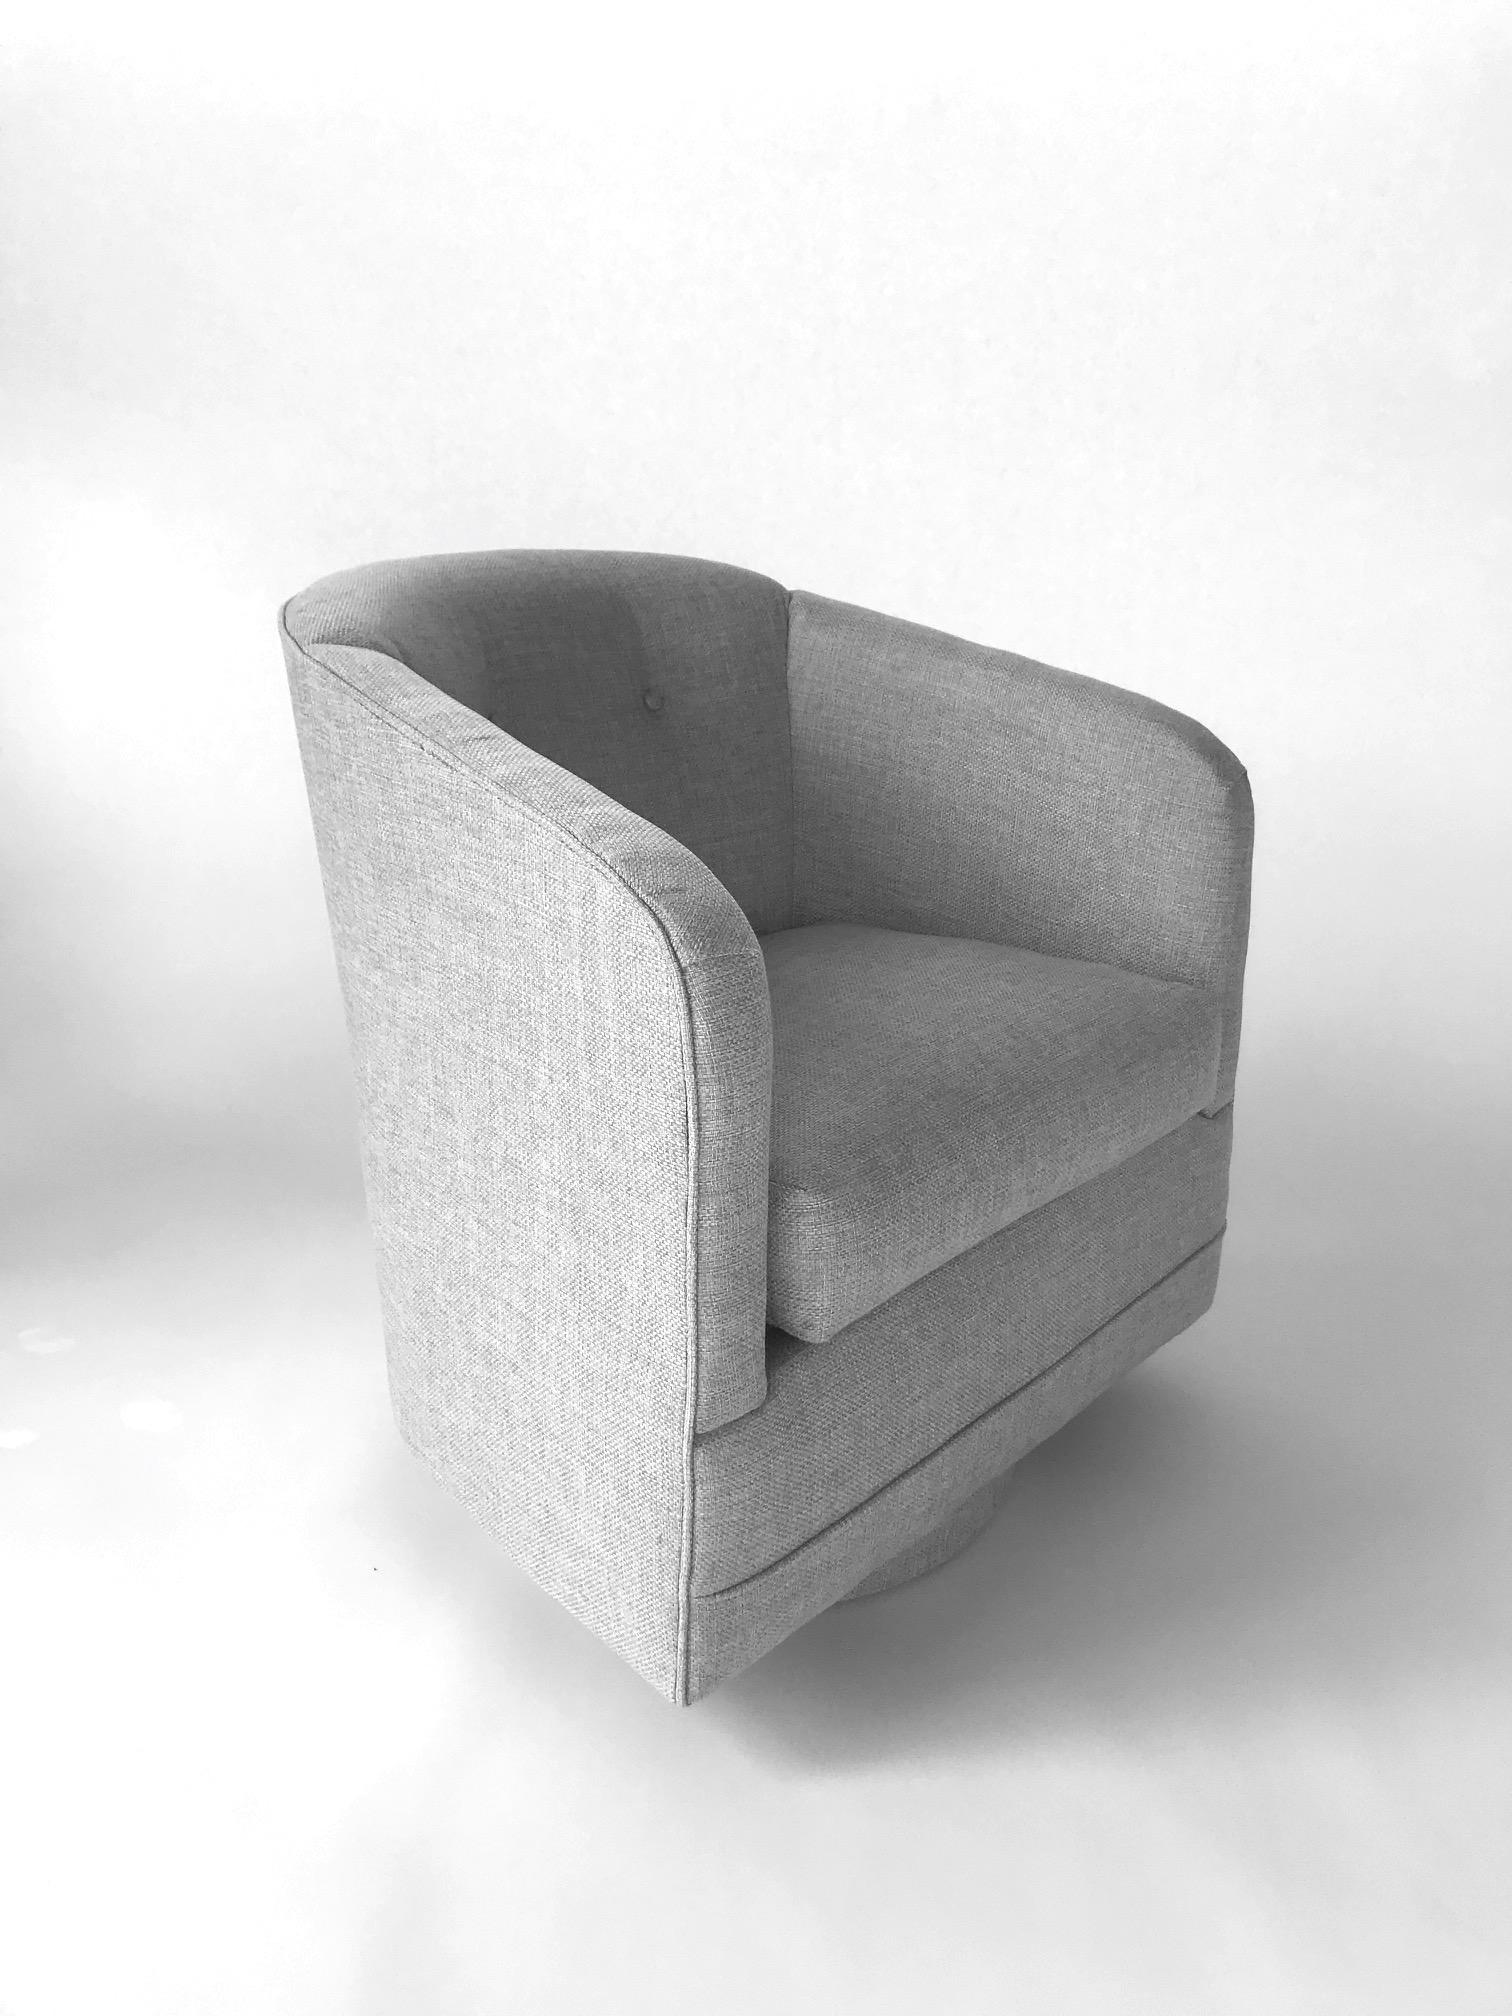 1970s Woven Upholstered Swivel Lounge Chair by Milo Baughman 2